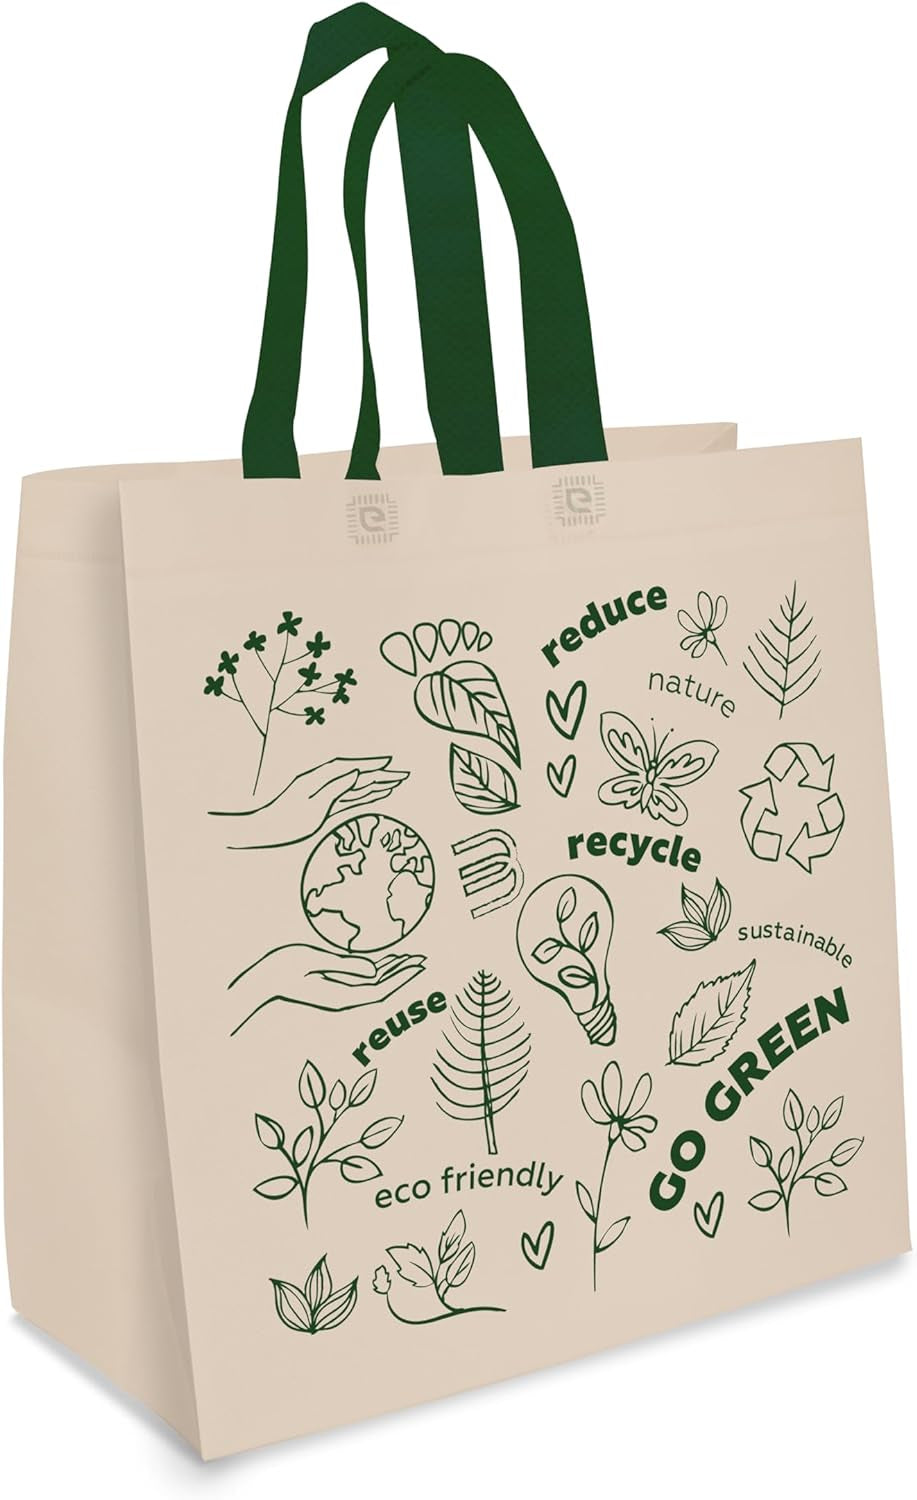 Large Reusable Grocery Shopping Tote Bags Made of Eco-Friendly Non-Woven Recyclable Materials 14X6.5X14In